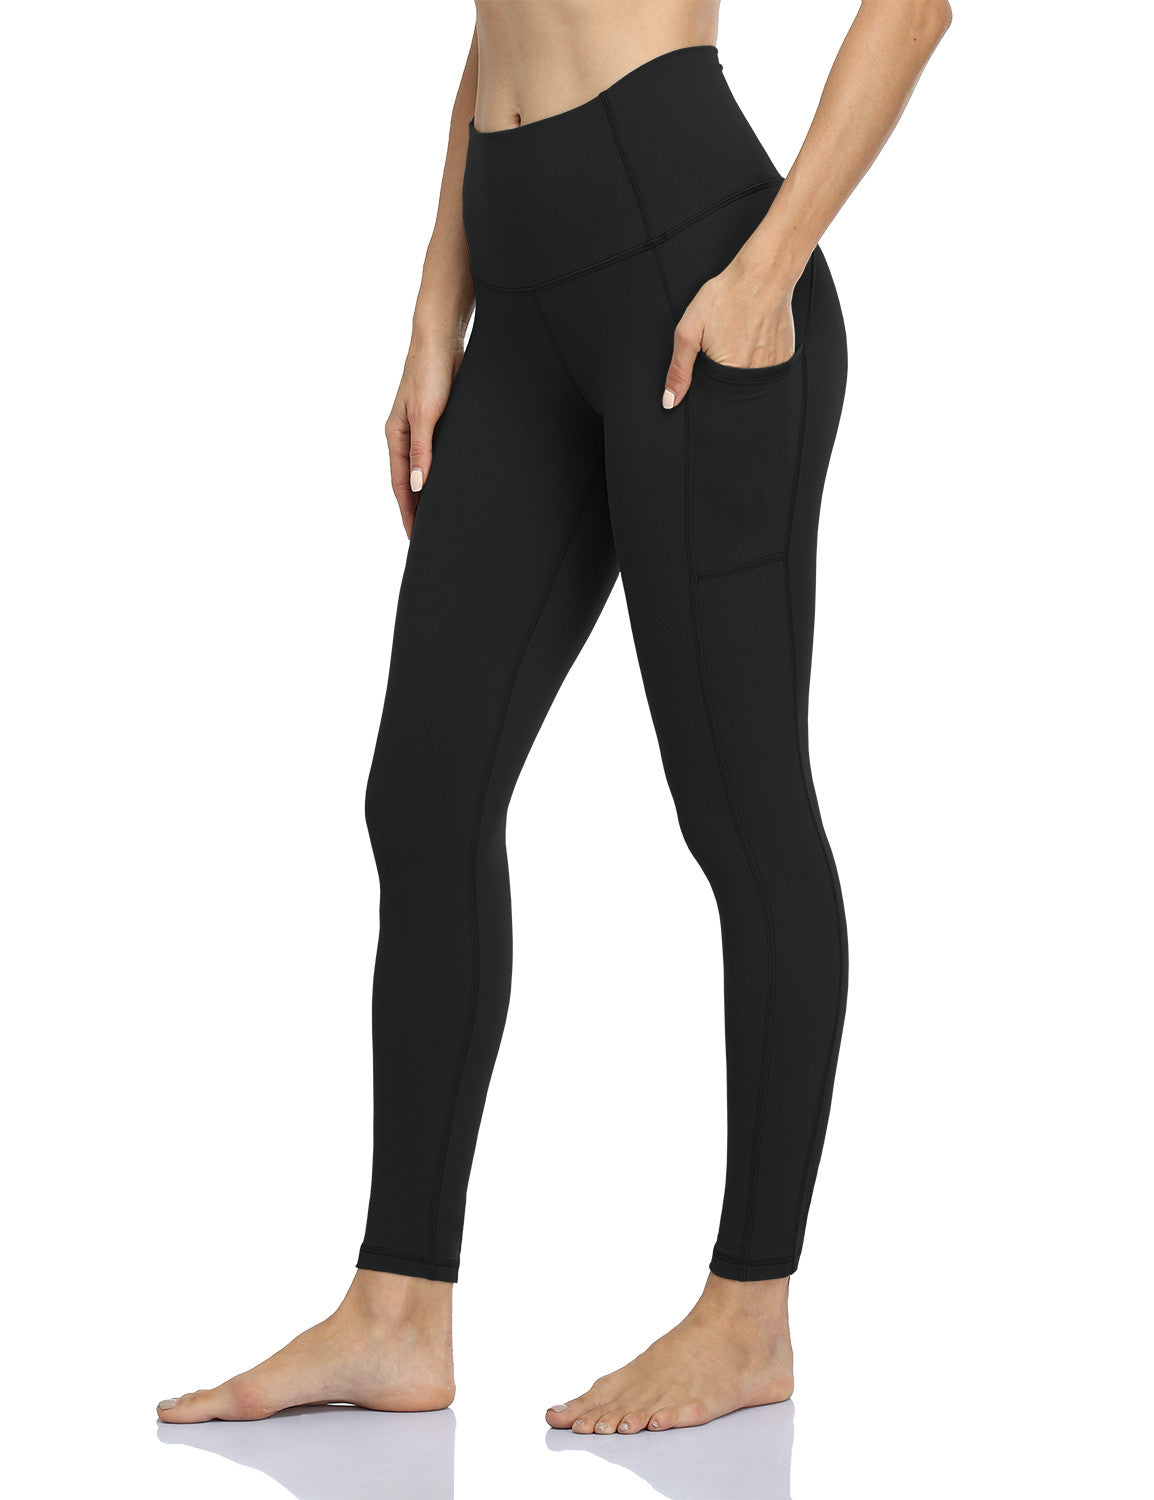 HeyNuts Essential High Waisted Yoga Leggings Review - Is It Worth It? 